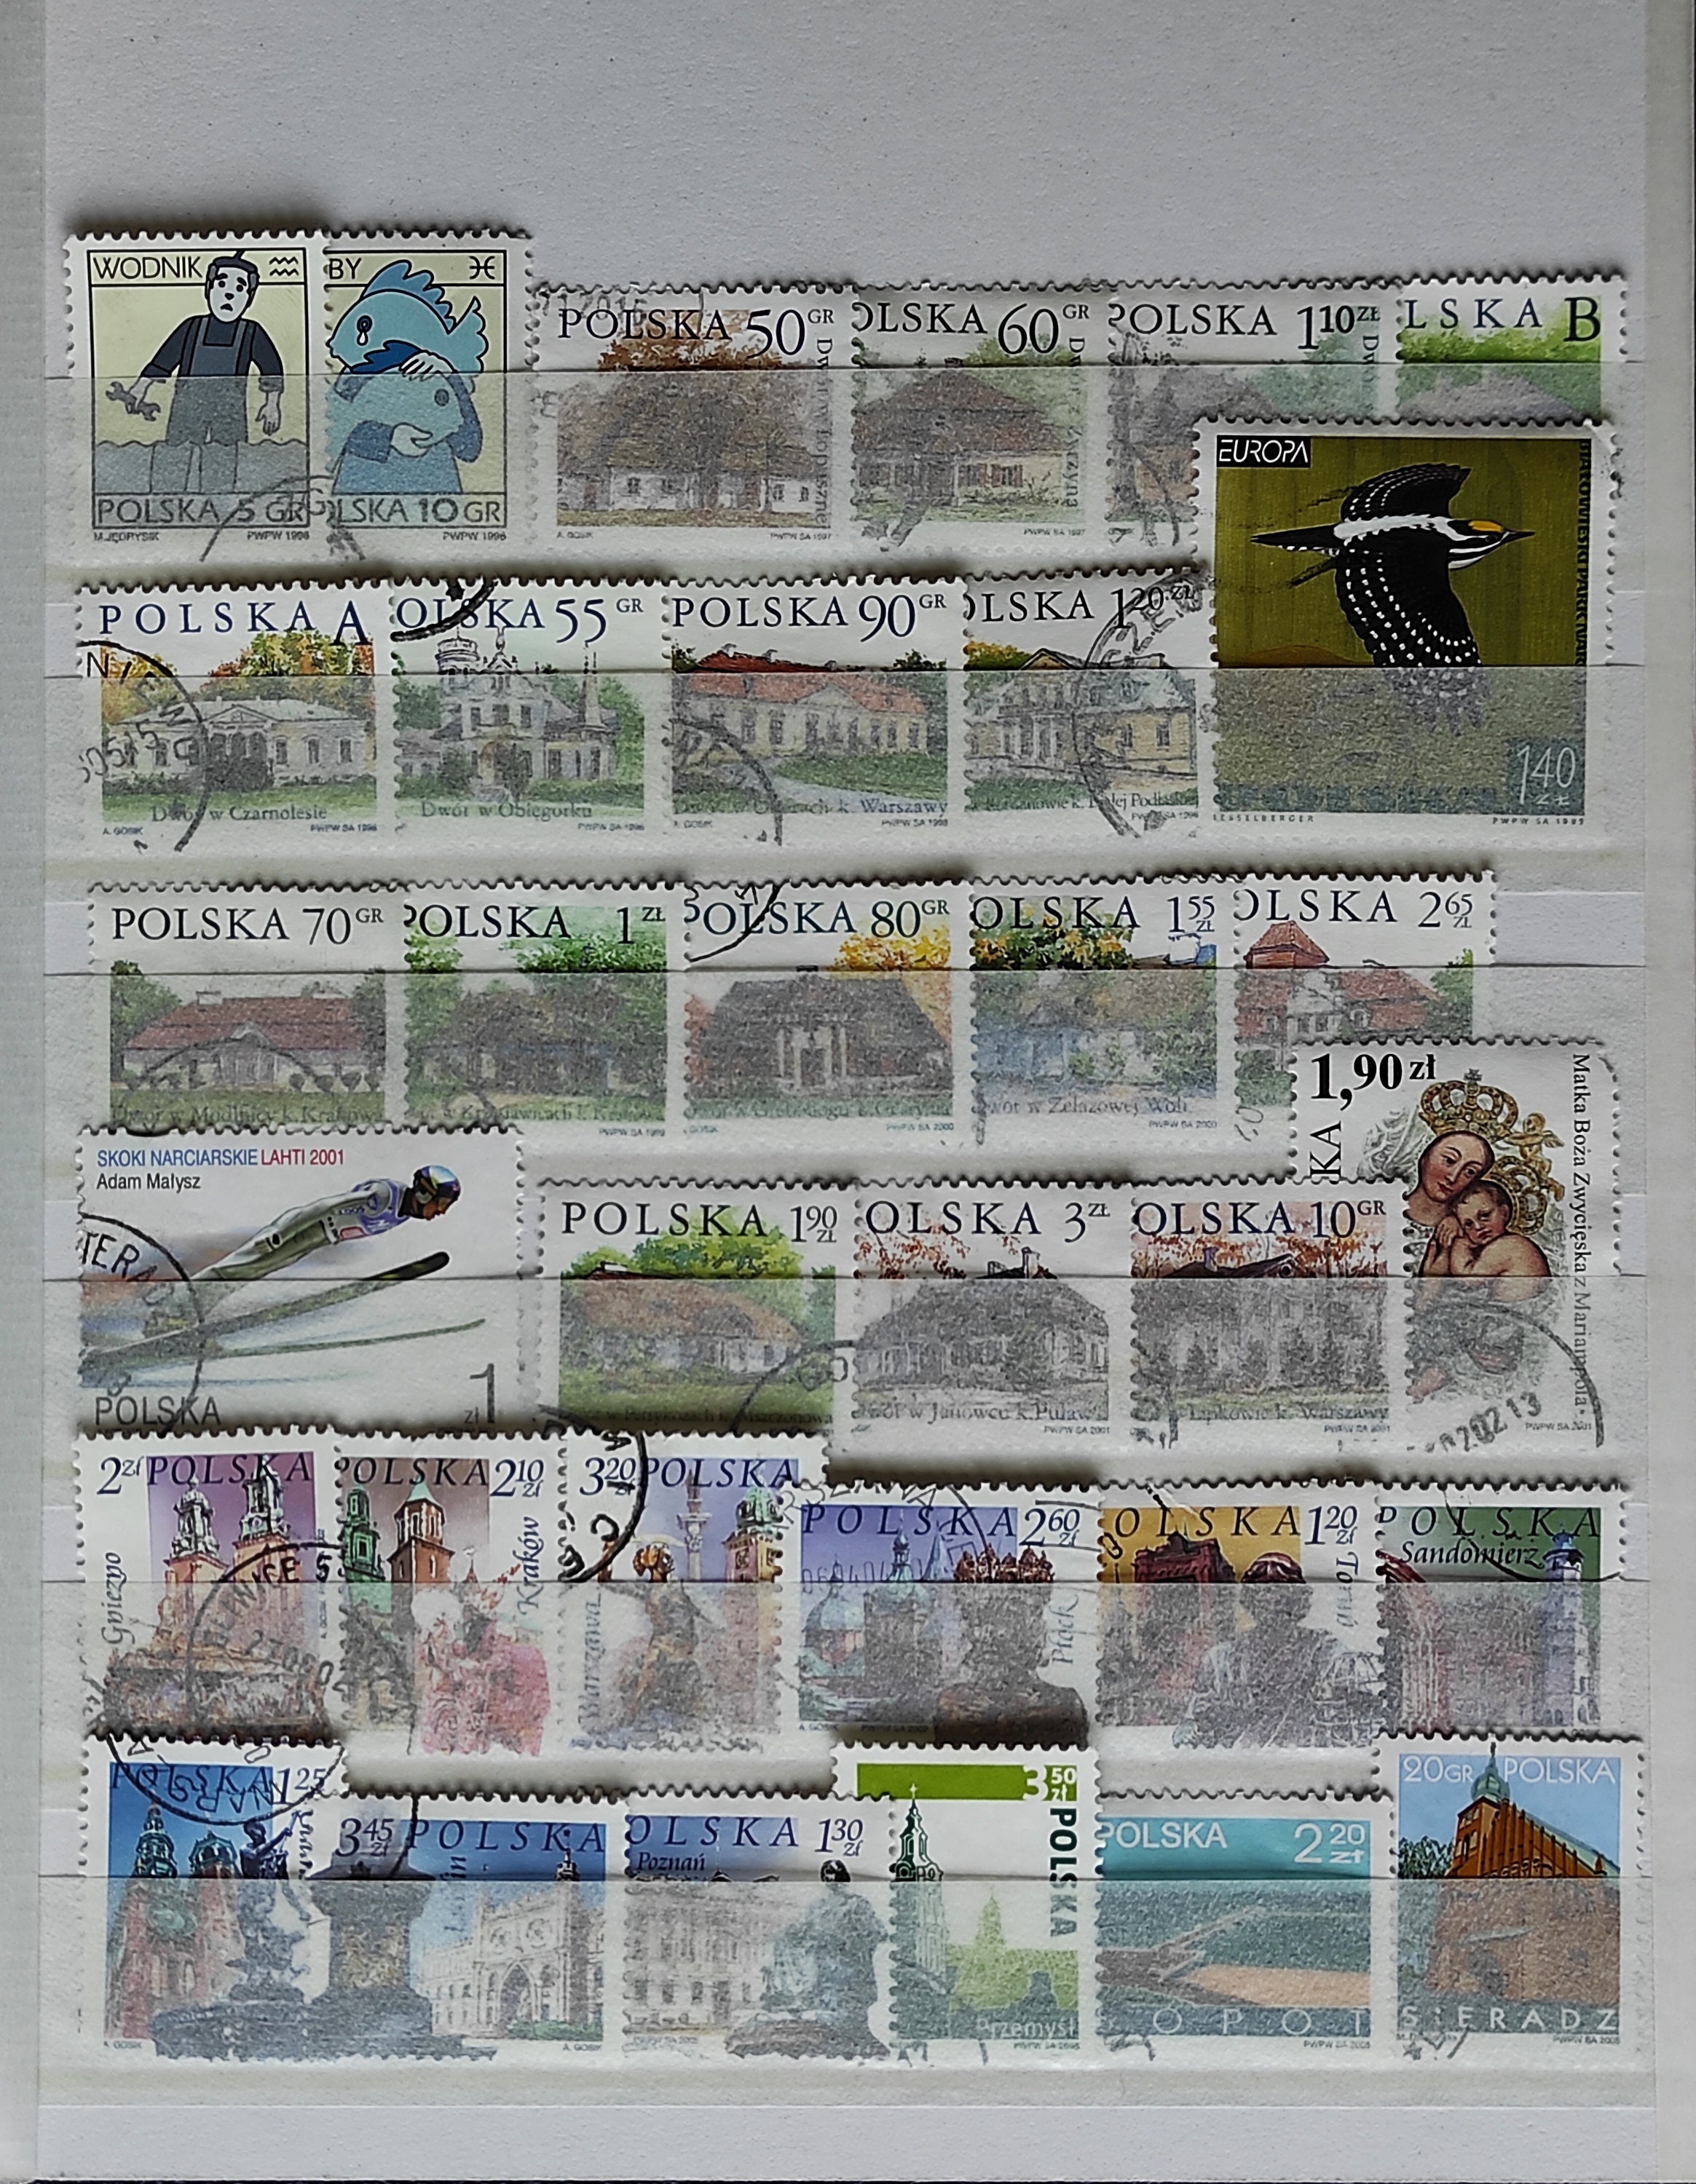 Poland - Original Vintage Postage Stamps - 1966 Tourist Attractions- for  the collector, artist or crafter- scrapbooks, decoupage, collage